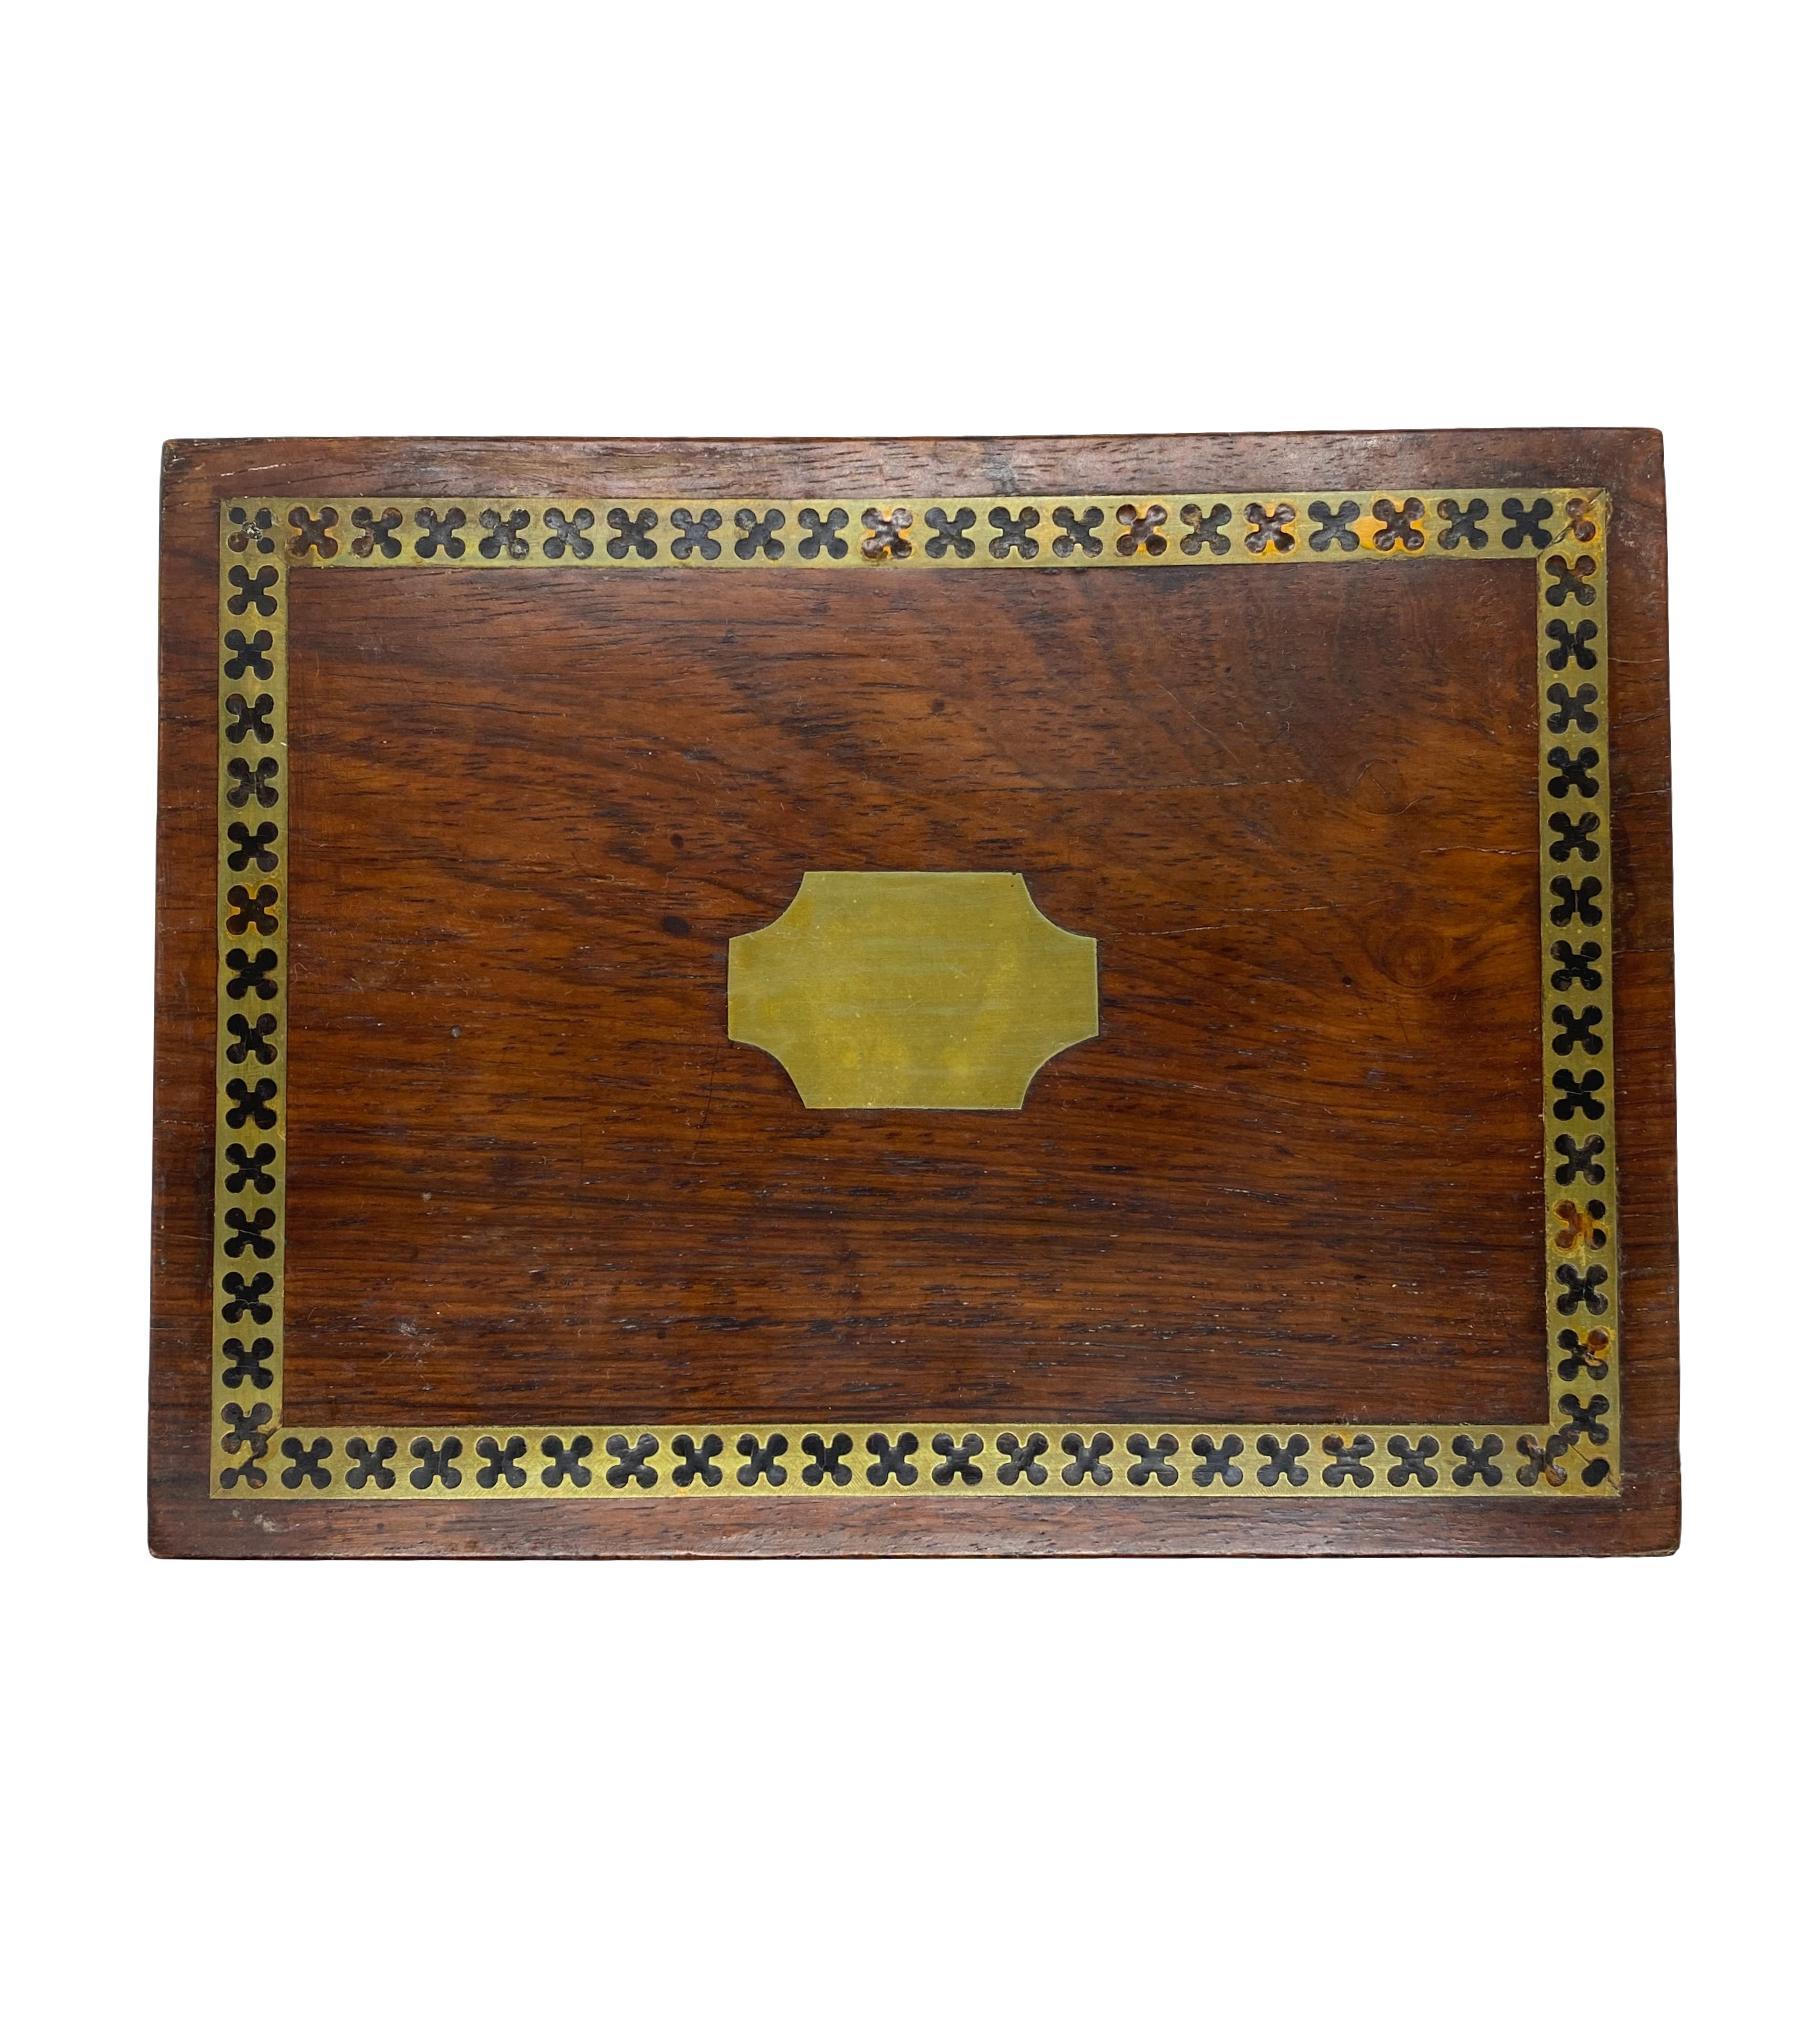 Hand-Crafted Antique Regency Box in Rosewood with Inlaid Ebony and Brass, English, circa 1820 For Sale